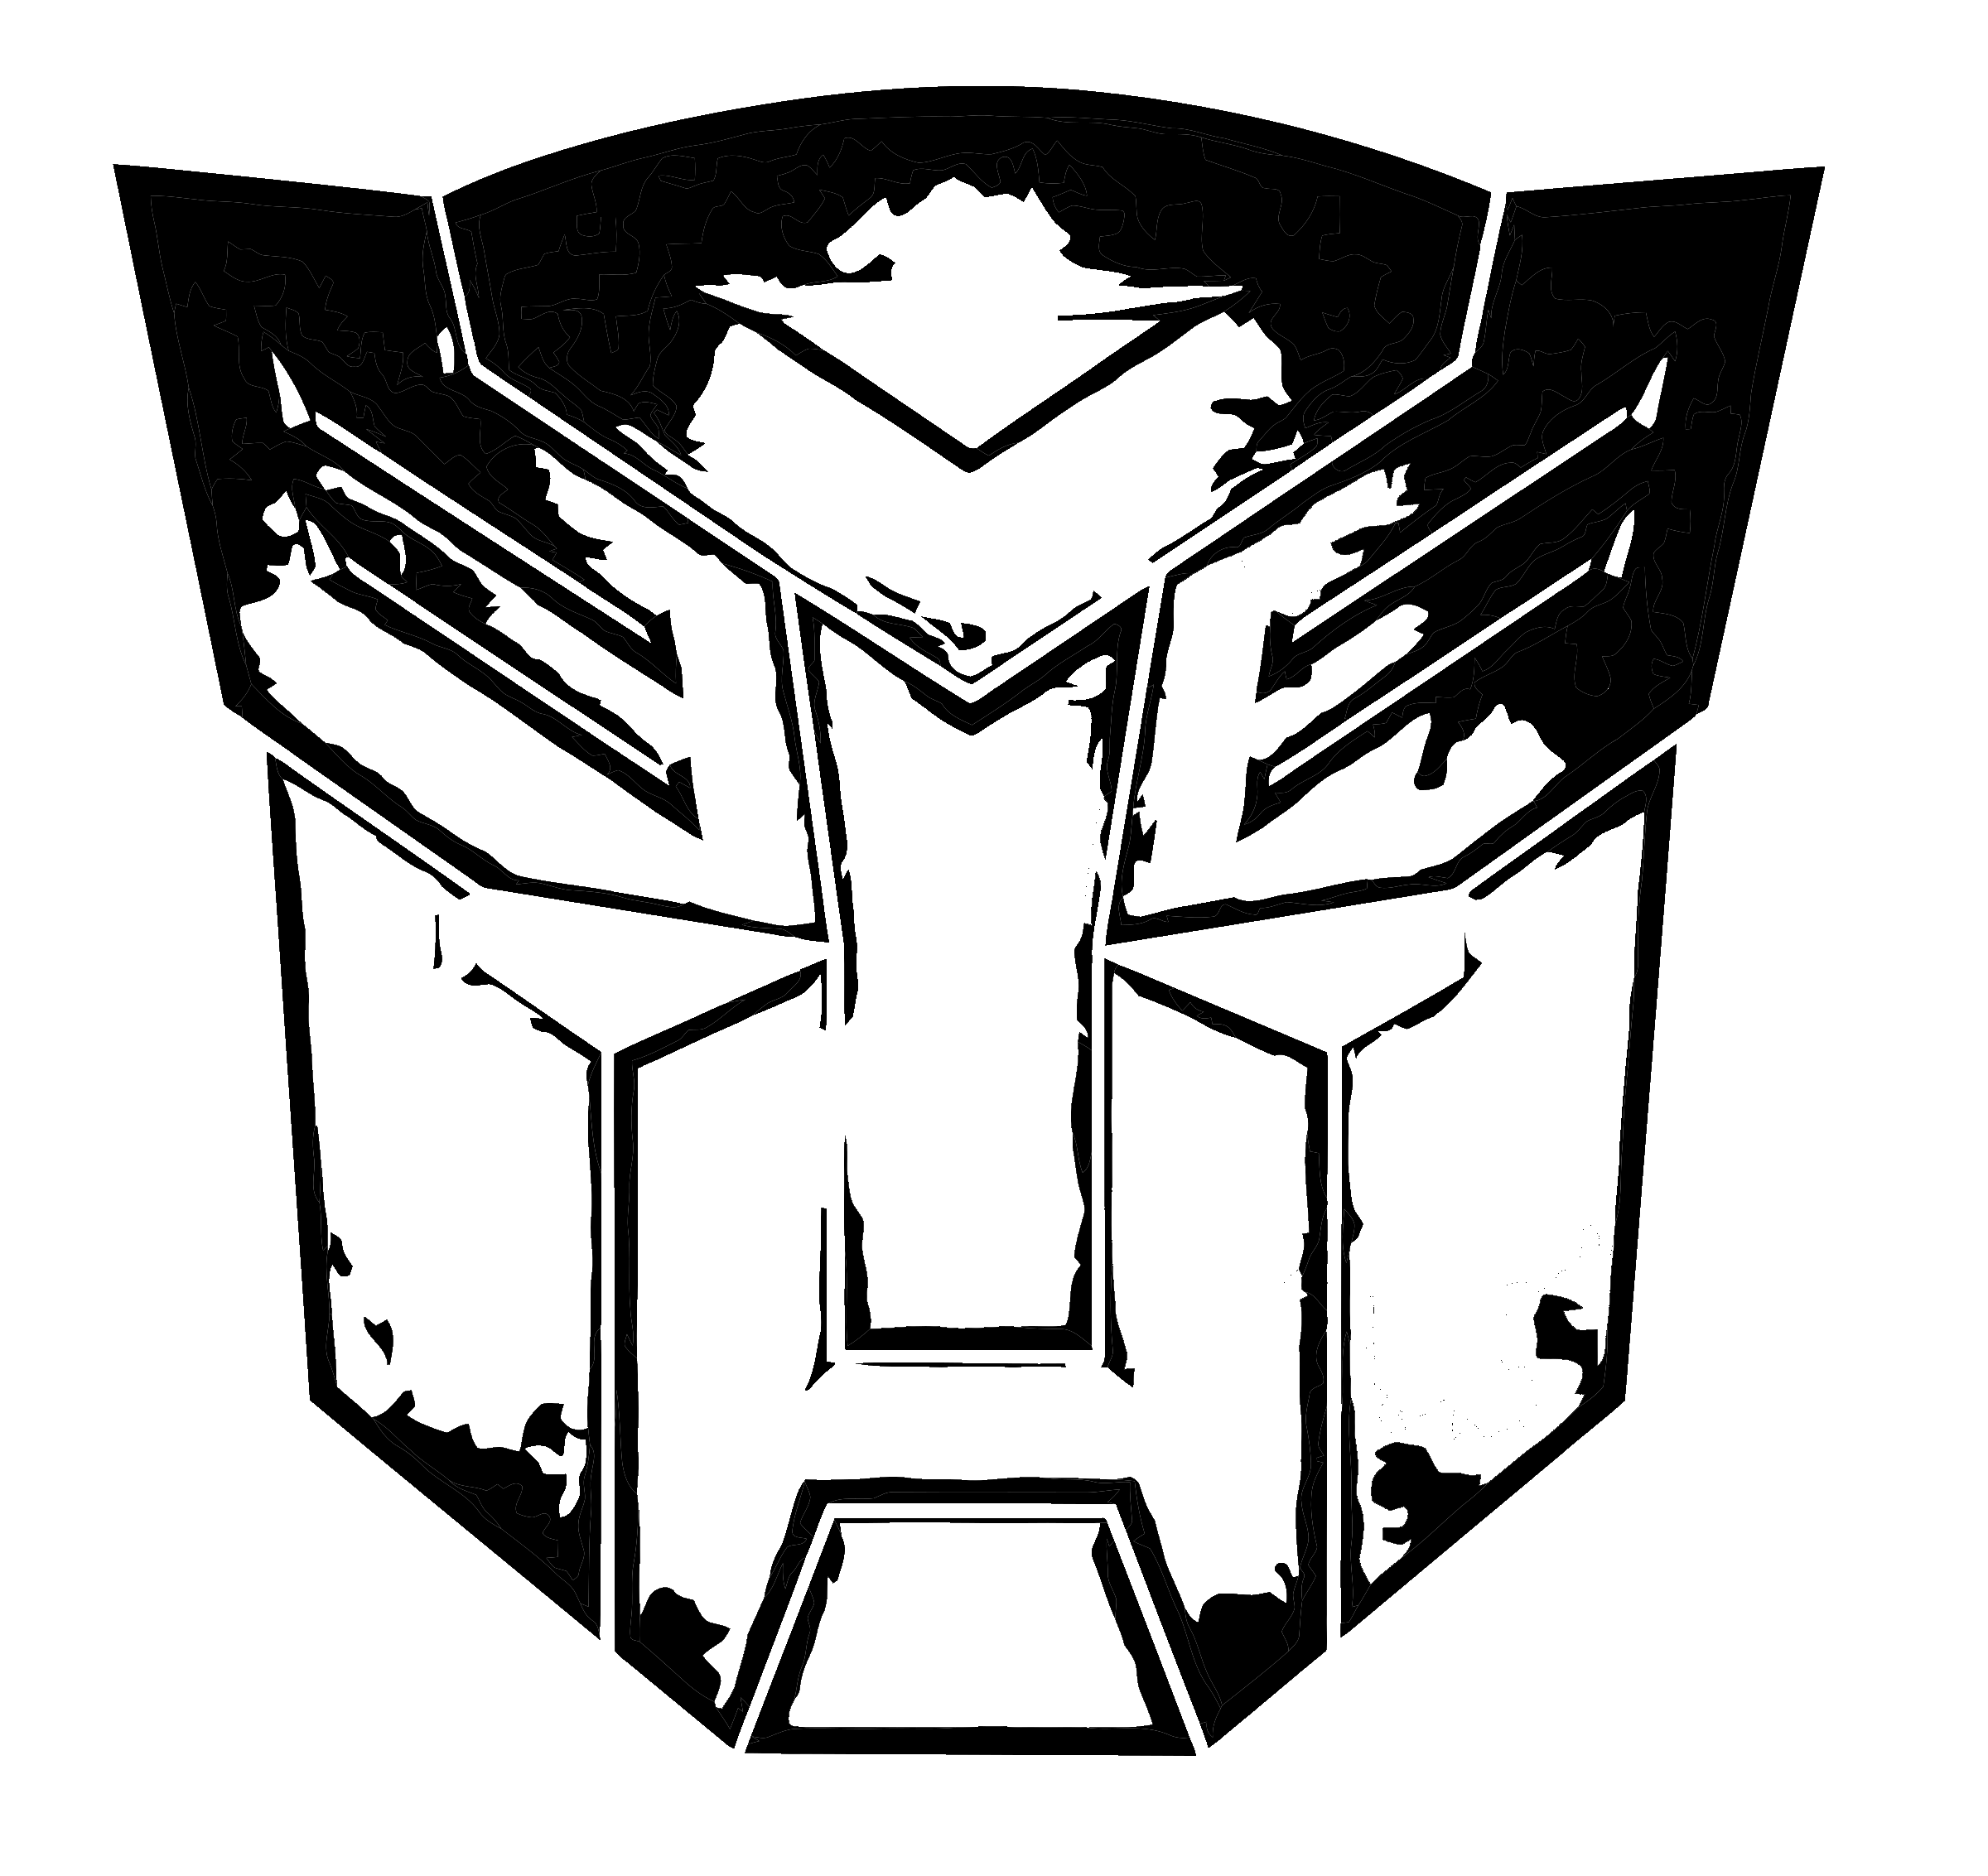 Transformers Black and White Logo - Autobot from Transformers Logo PNG Transparent & SVG Vector ...